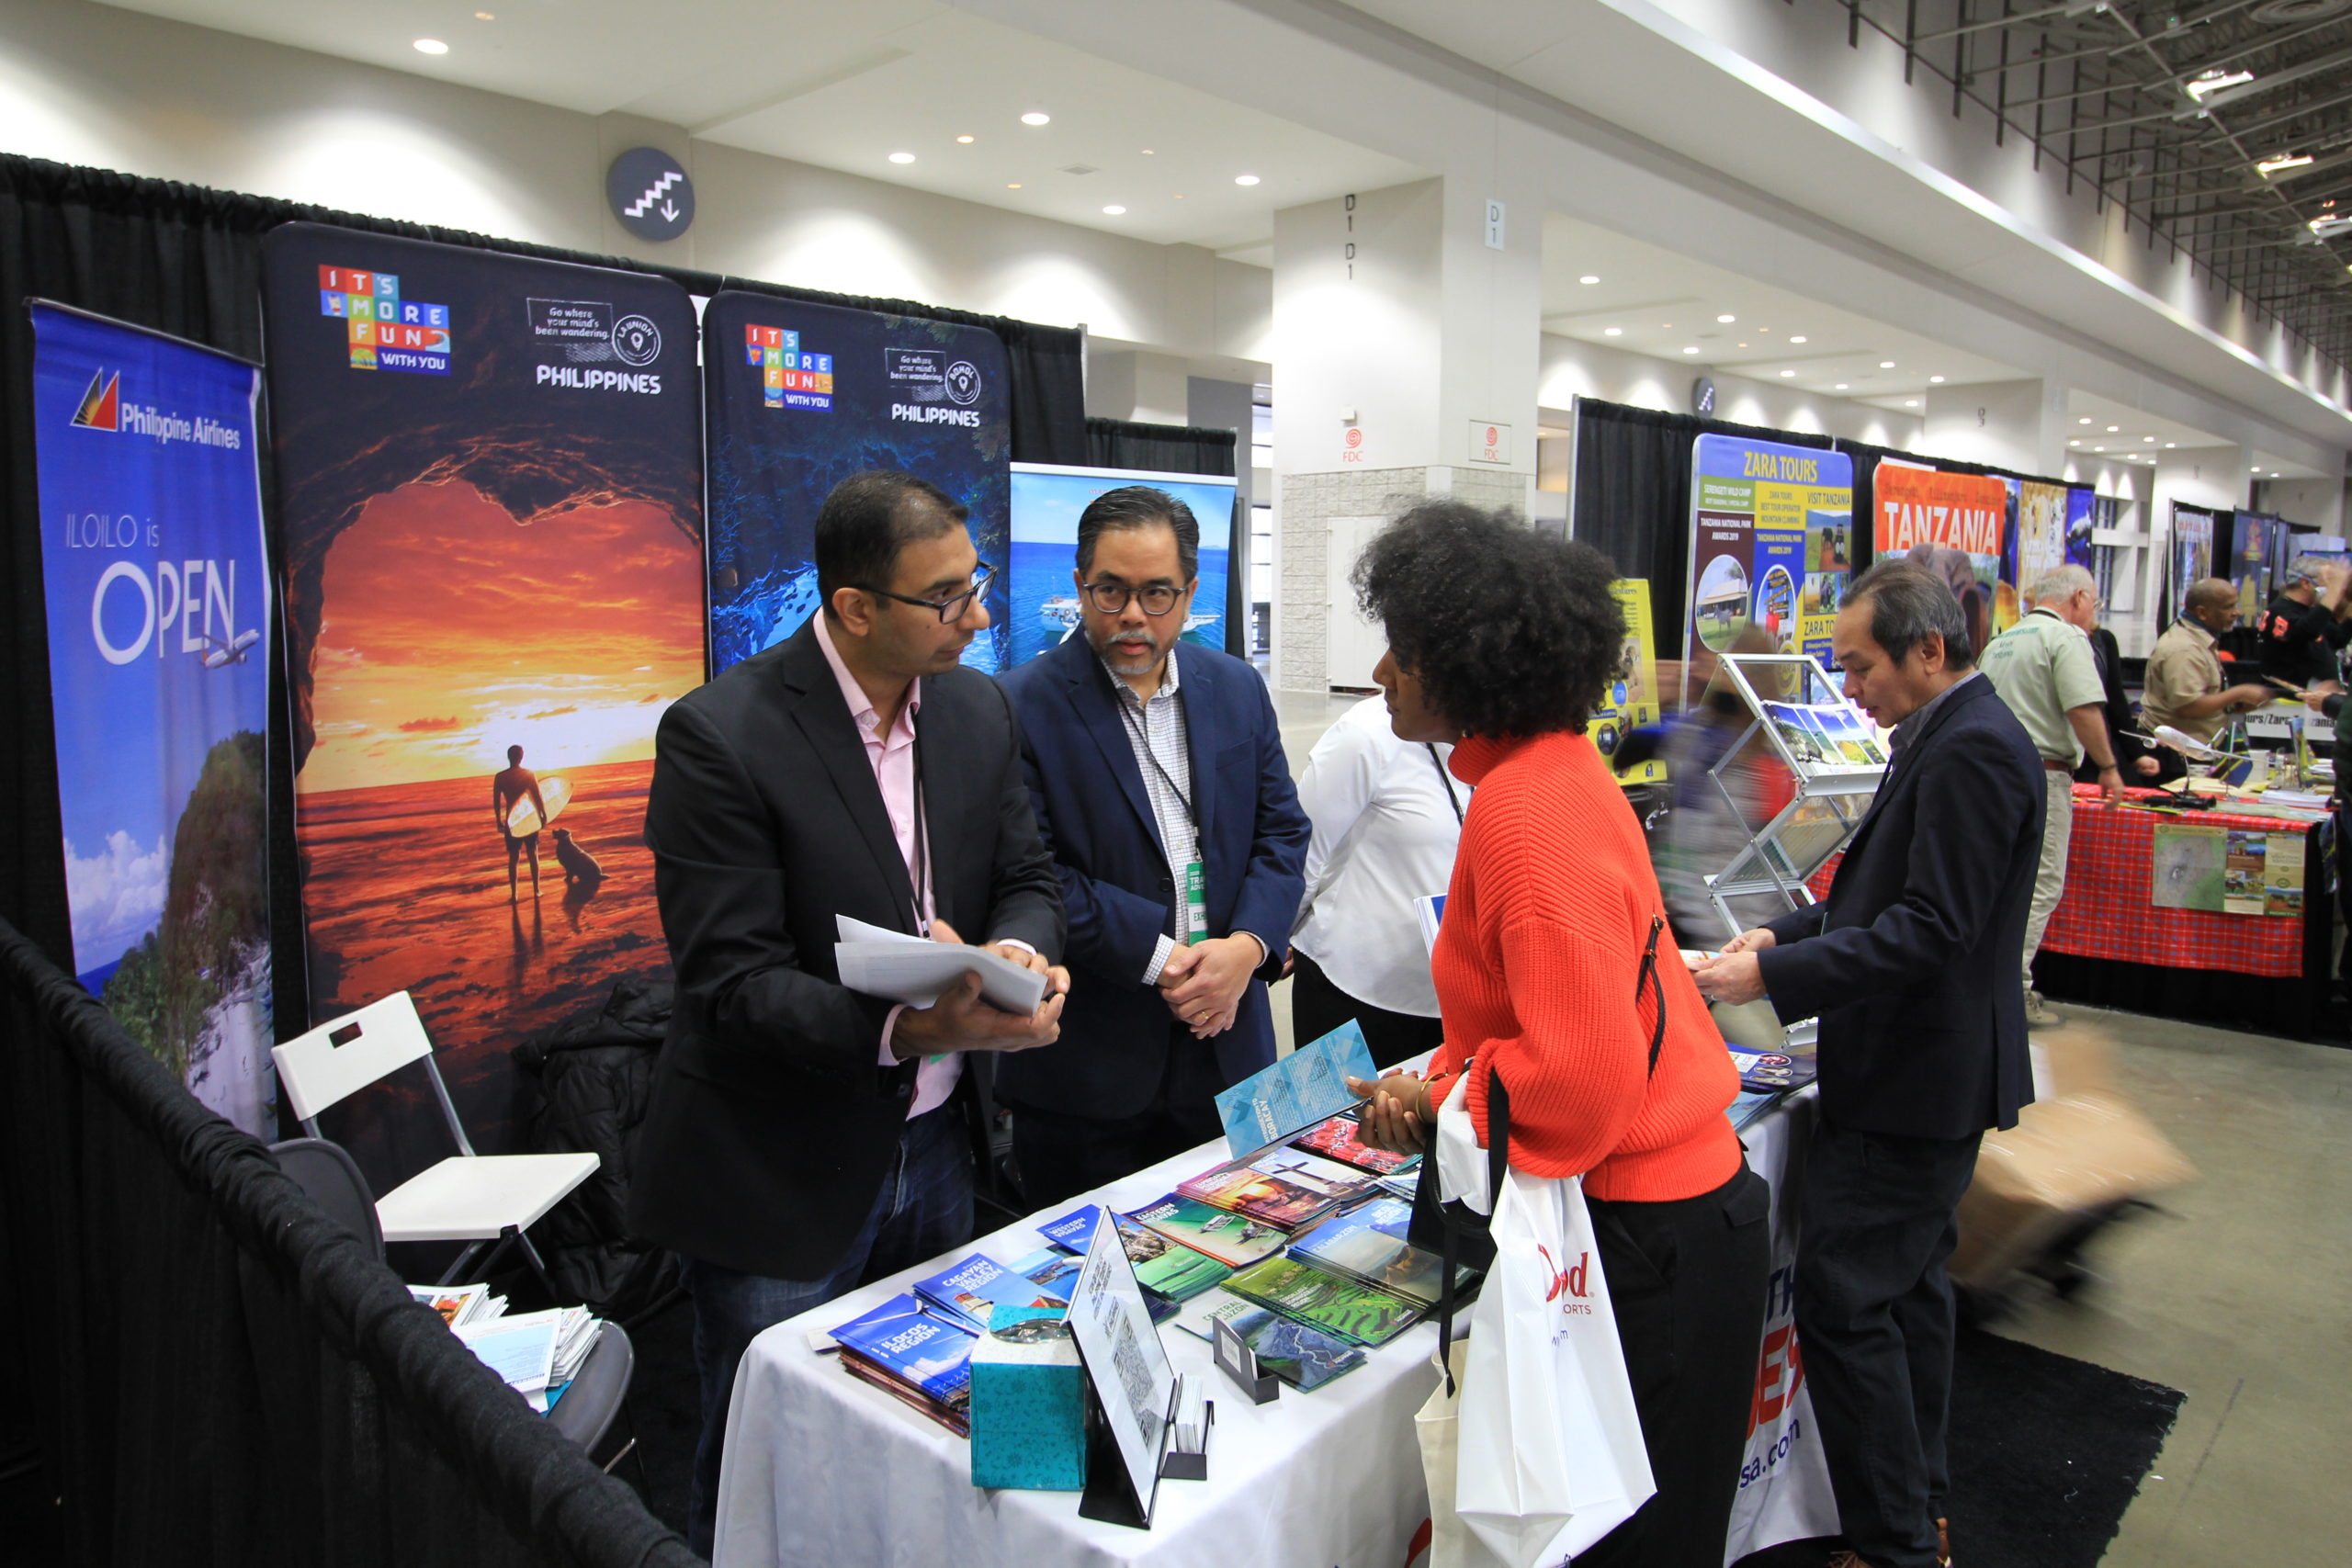 PAL Executive Syed Shahid (left) and Charge d’Affaires,  a.i. Jaime Ramon Ascalon, Jr. (right) engage a participant at the Philippines' Booth at the Washington DC travel and adventure Expo